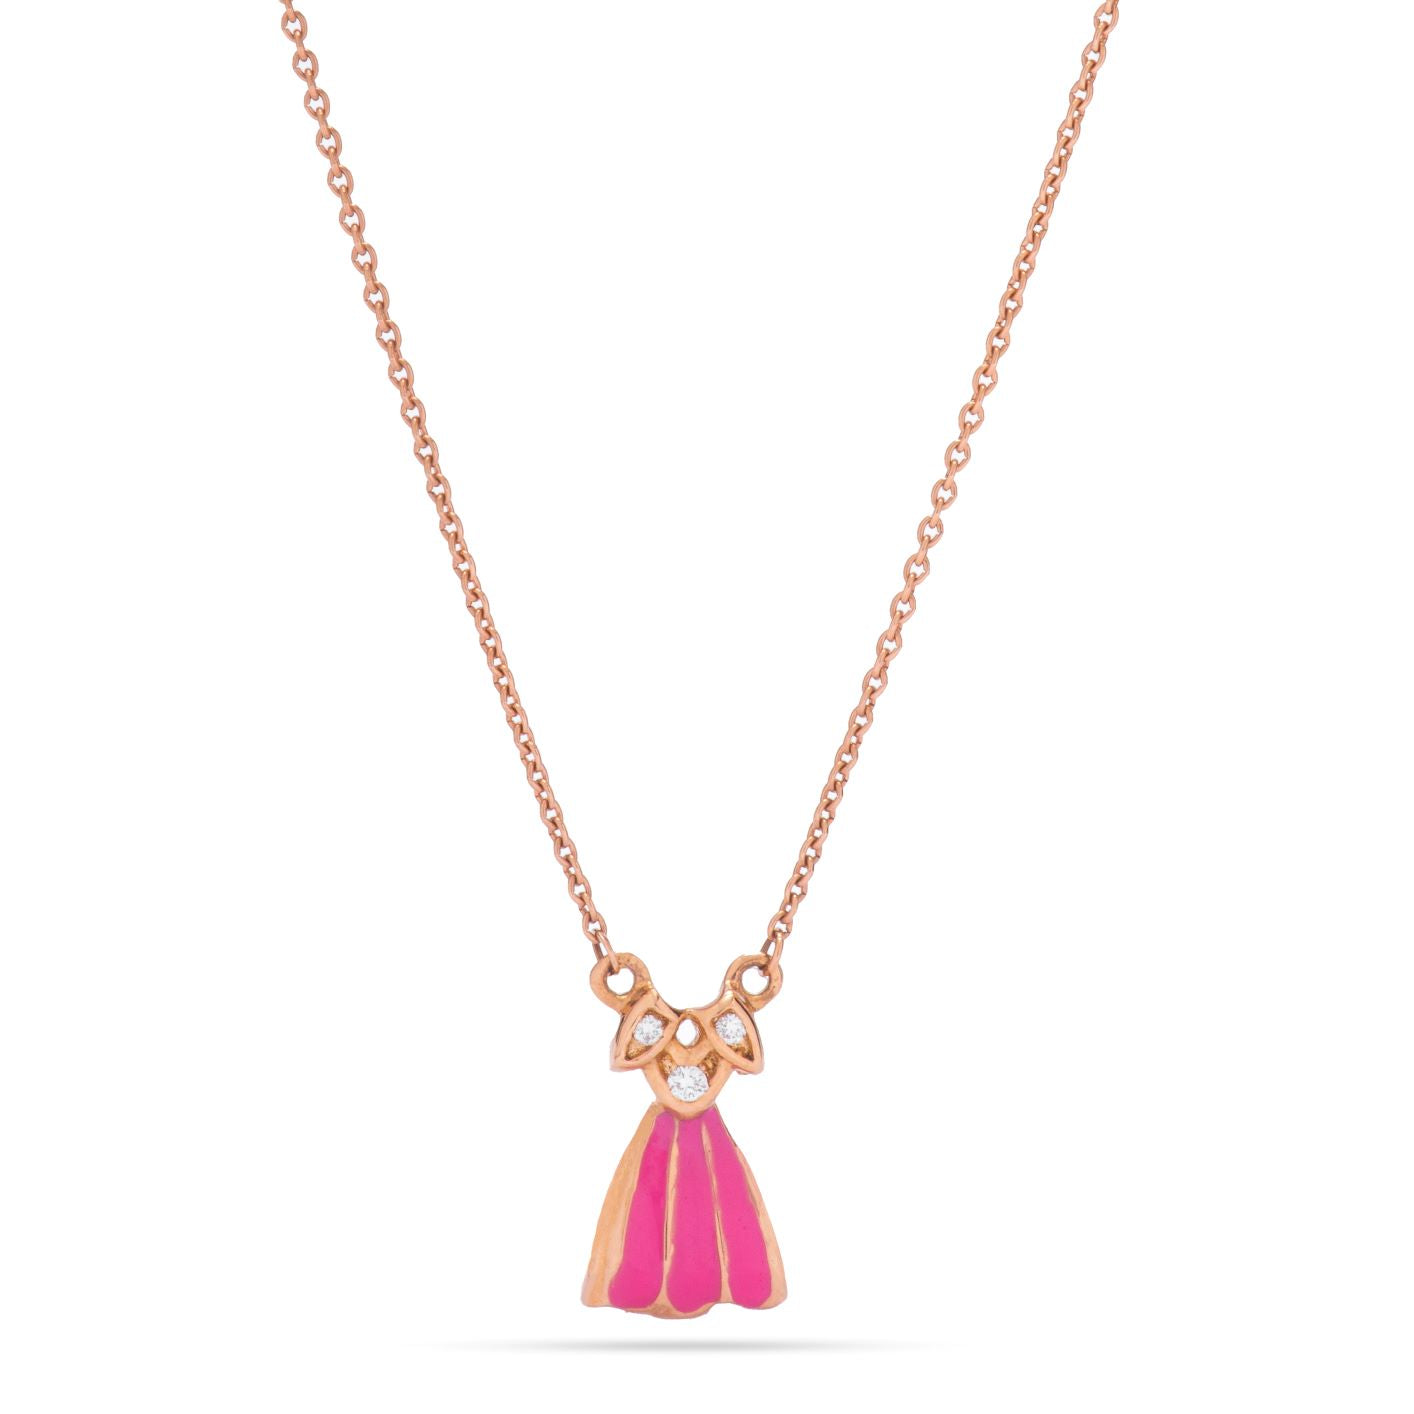 Kid's Delightful Doll Shaped Necklace in Yellow 18 K Gold - NB0445